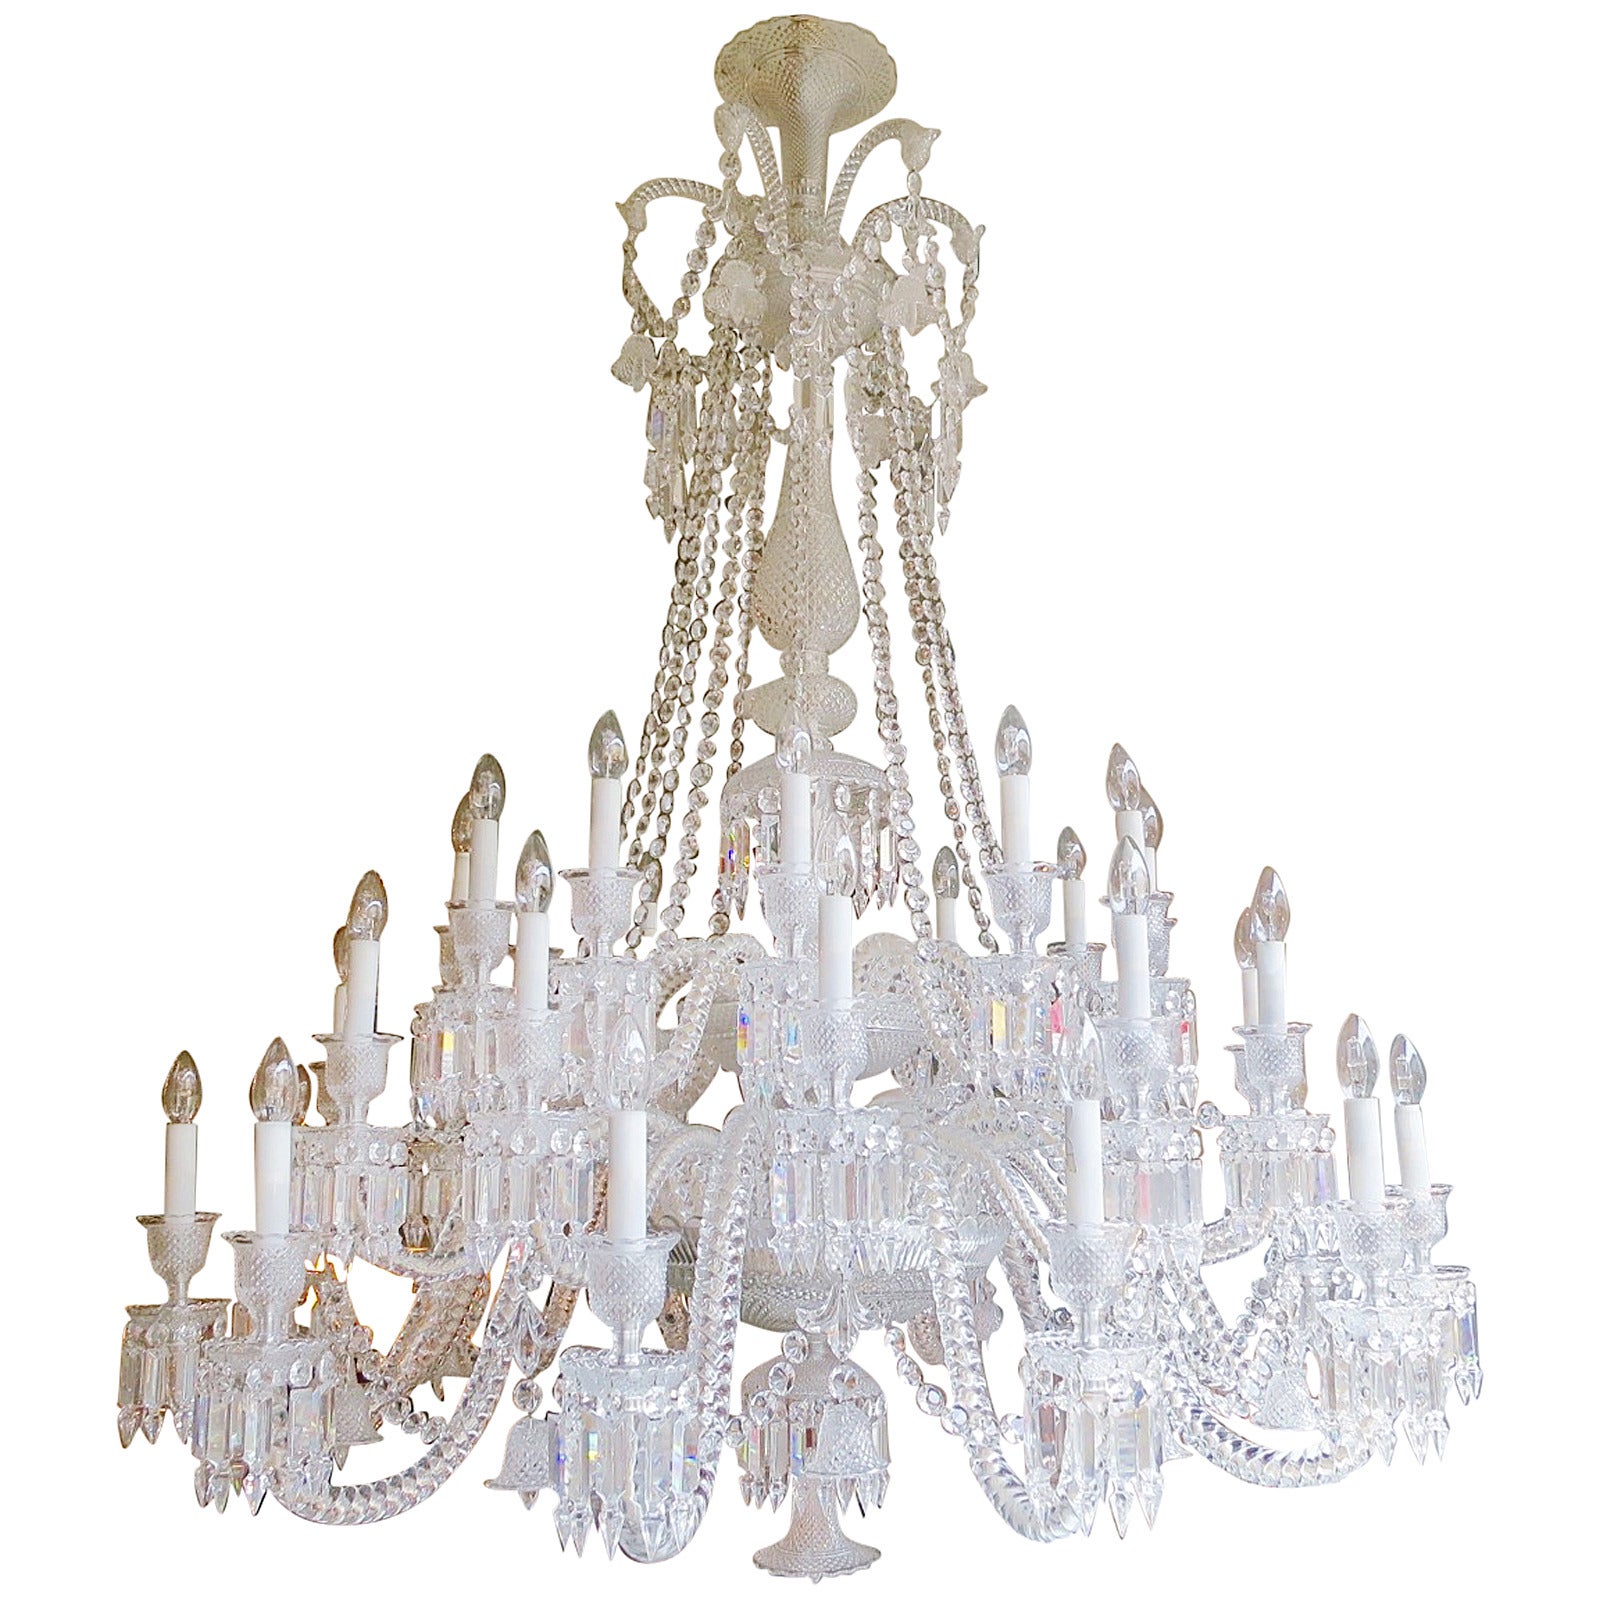 Large Thirty-Six-Arm Baccarat "Zenith" Chandelier Designed by Philippe Starck